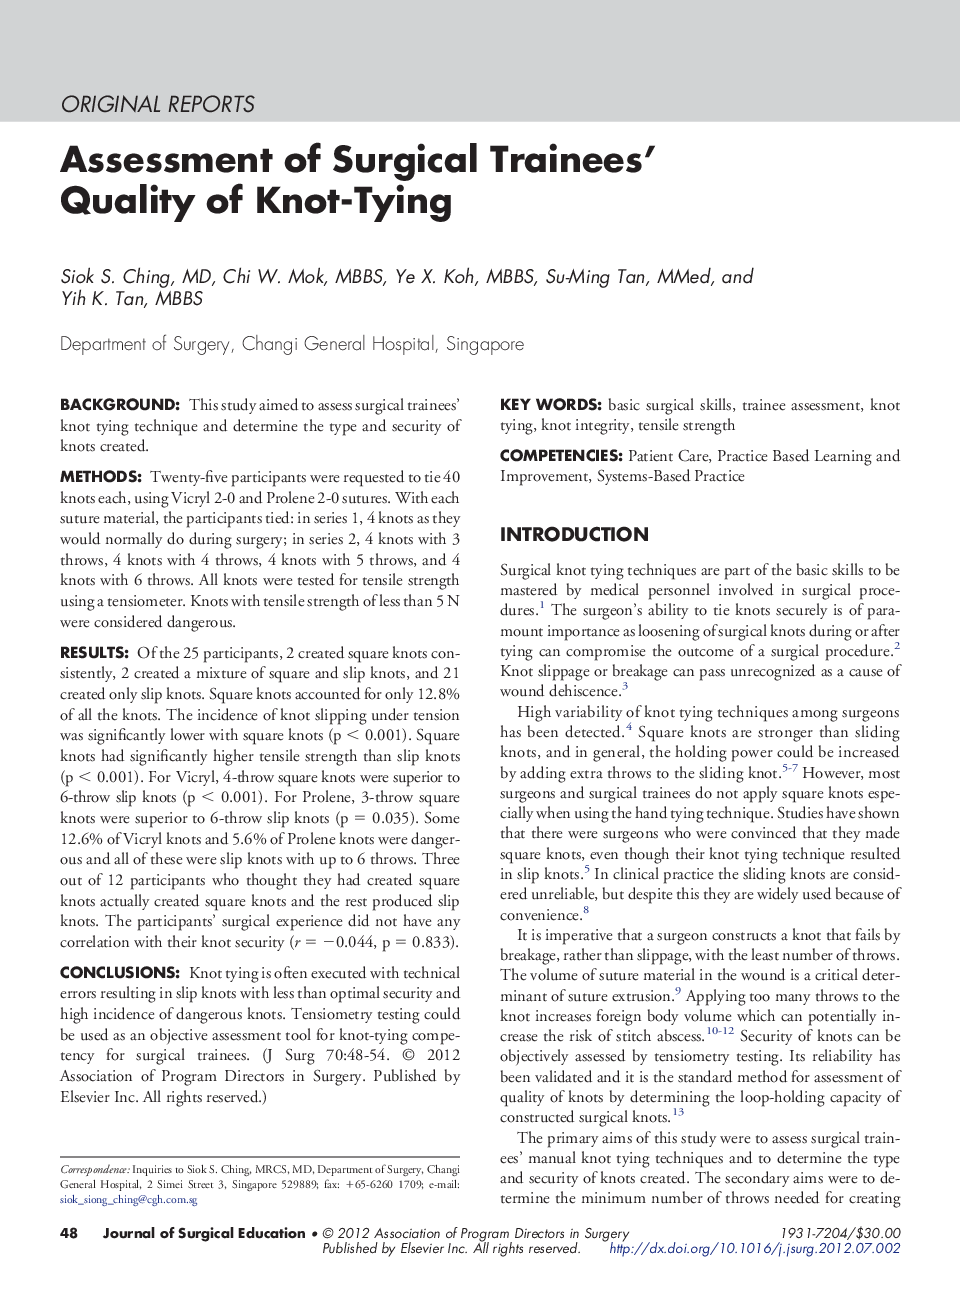 Assessment of Surgical Trainees' Quality of Knot-Tying